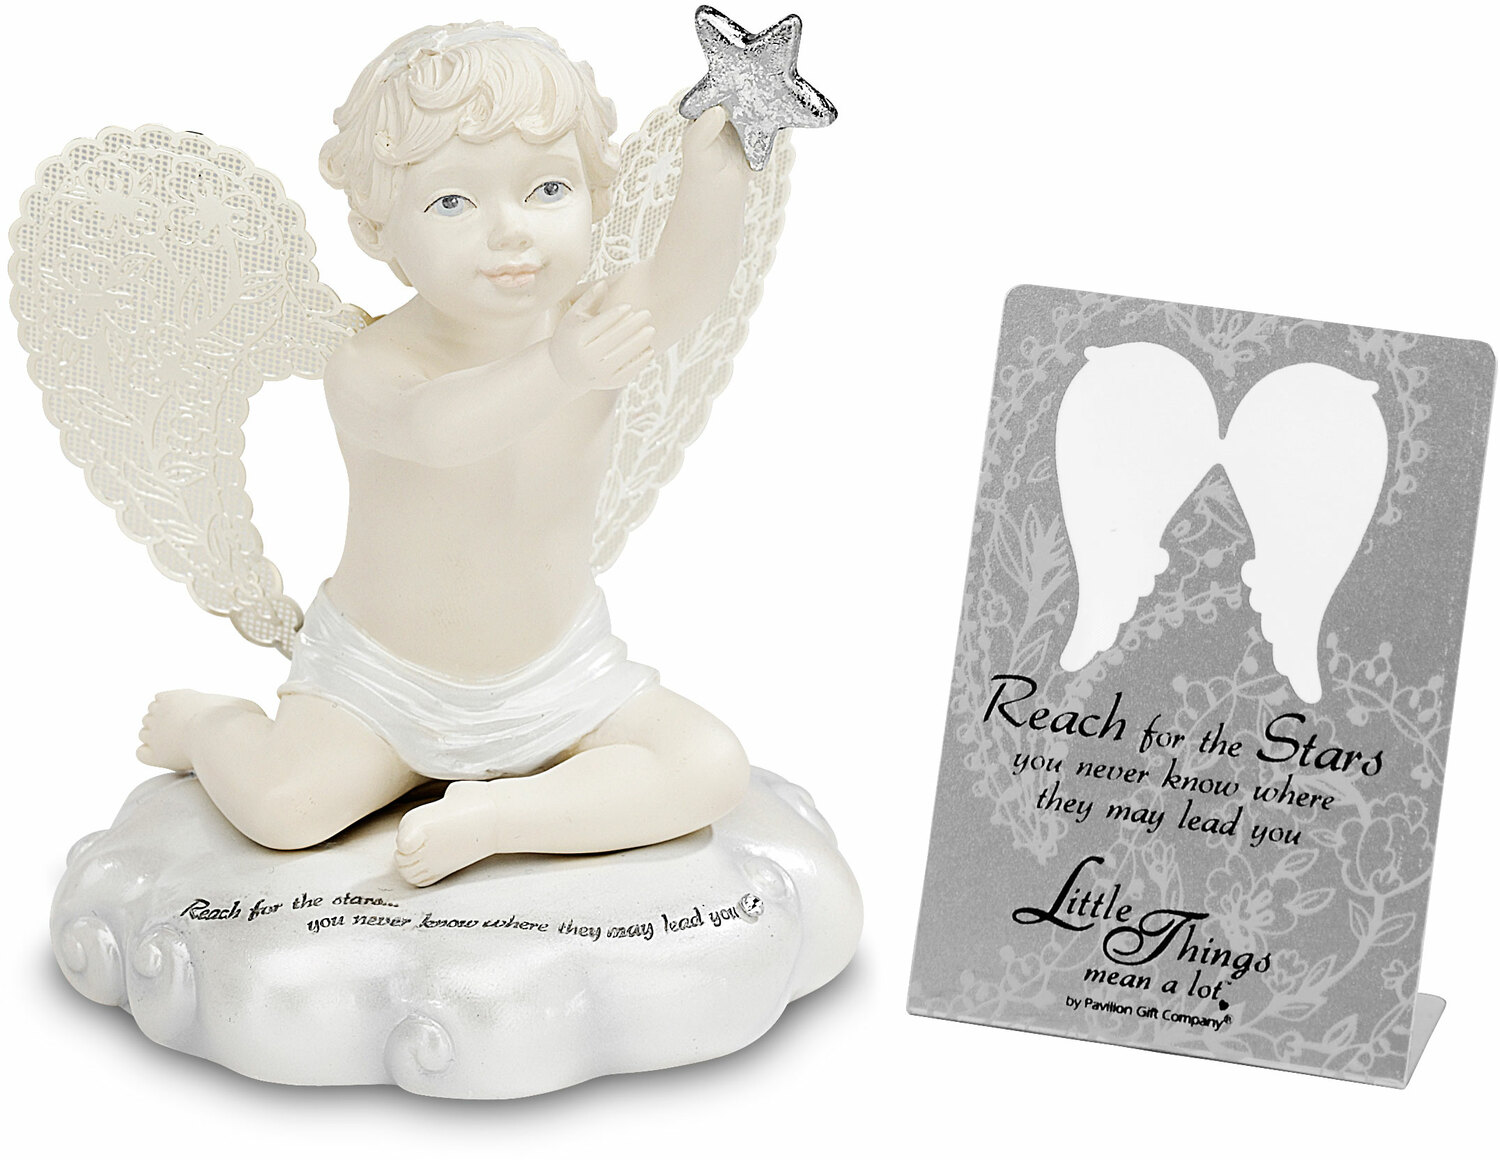 Reach for the Stars by Little Things Mean A Lot - Reach for the Stars - 3.5" Cherub Holding Star